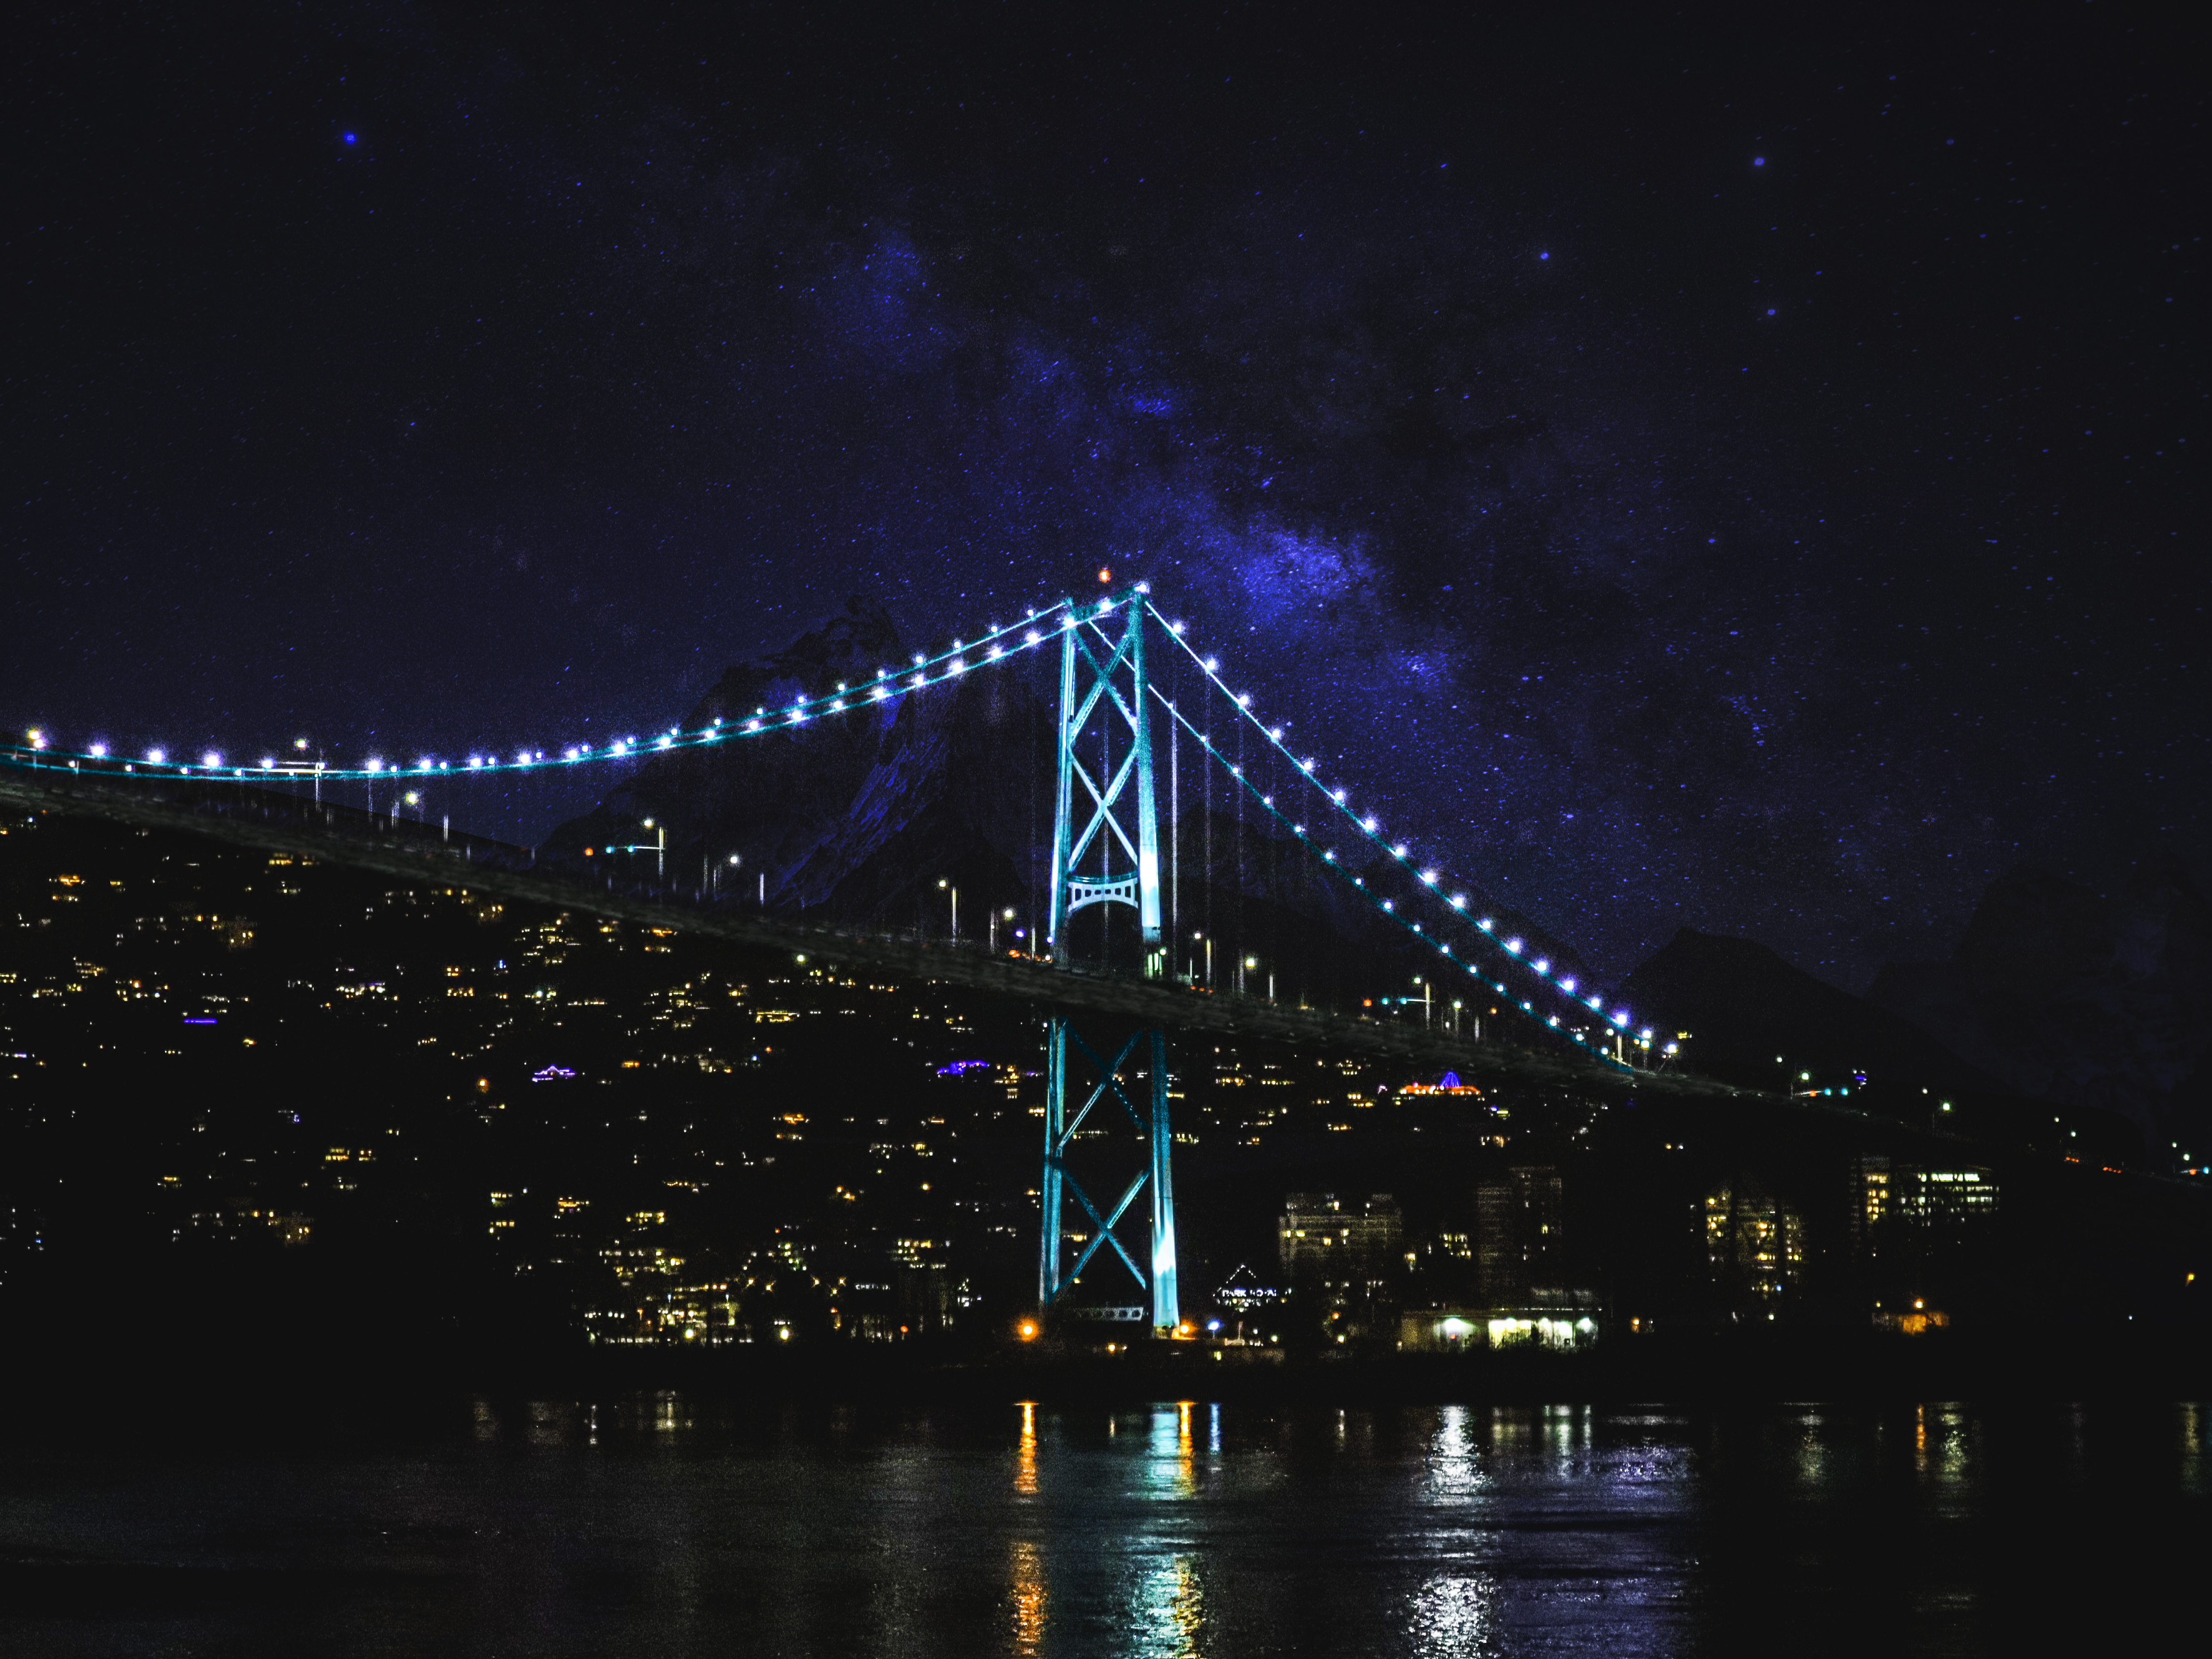 A night capture of Lions Gate Bridge in Vancouver, British Columbia. by Jaskeerat